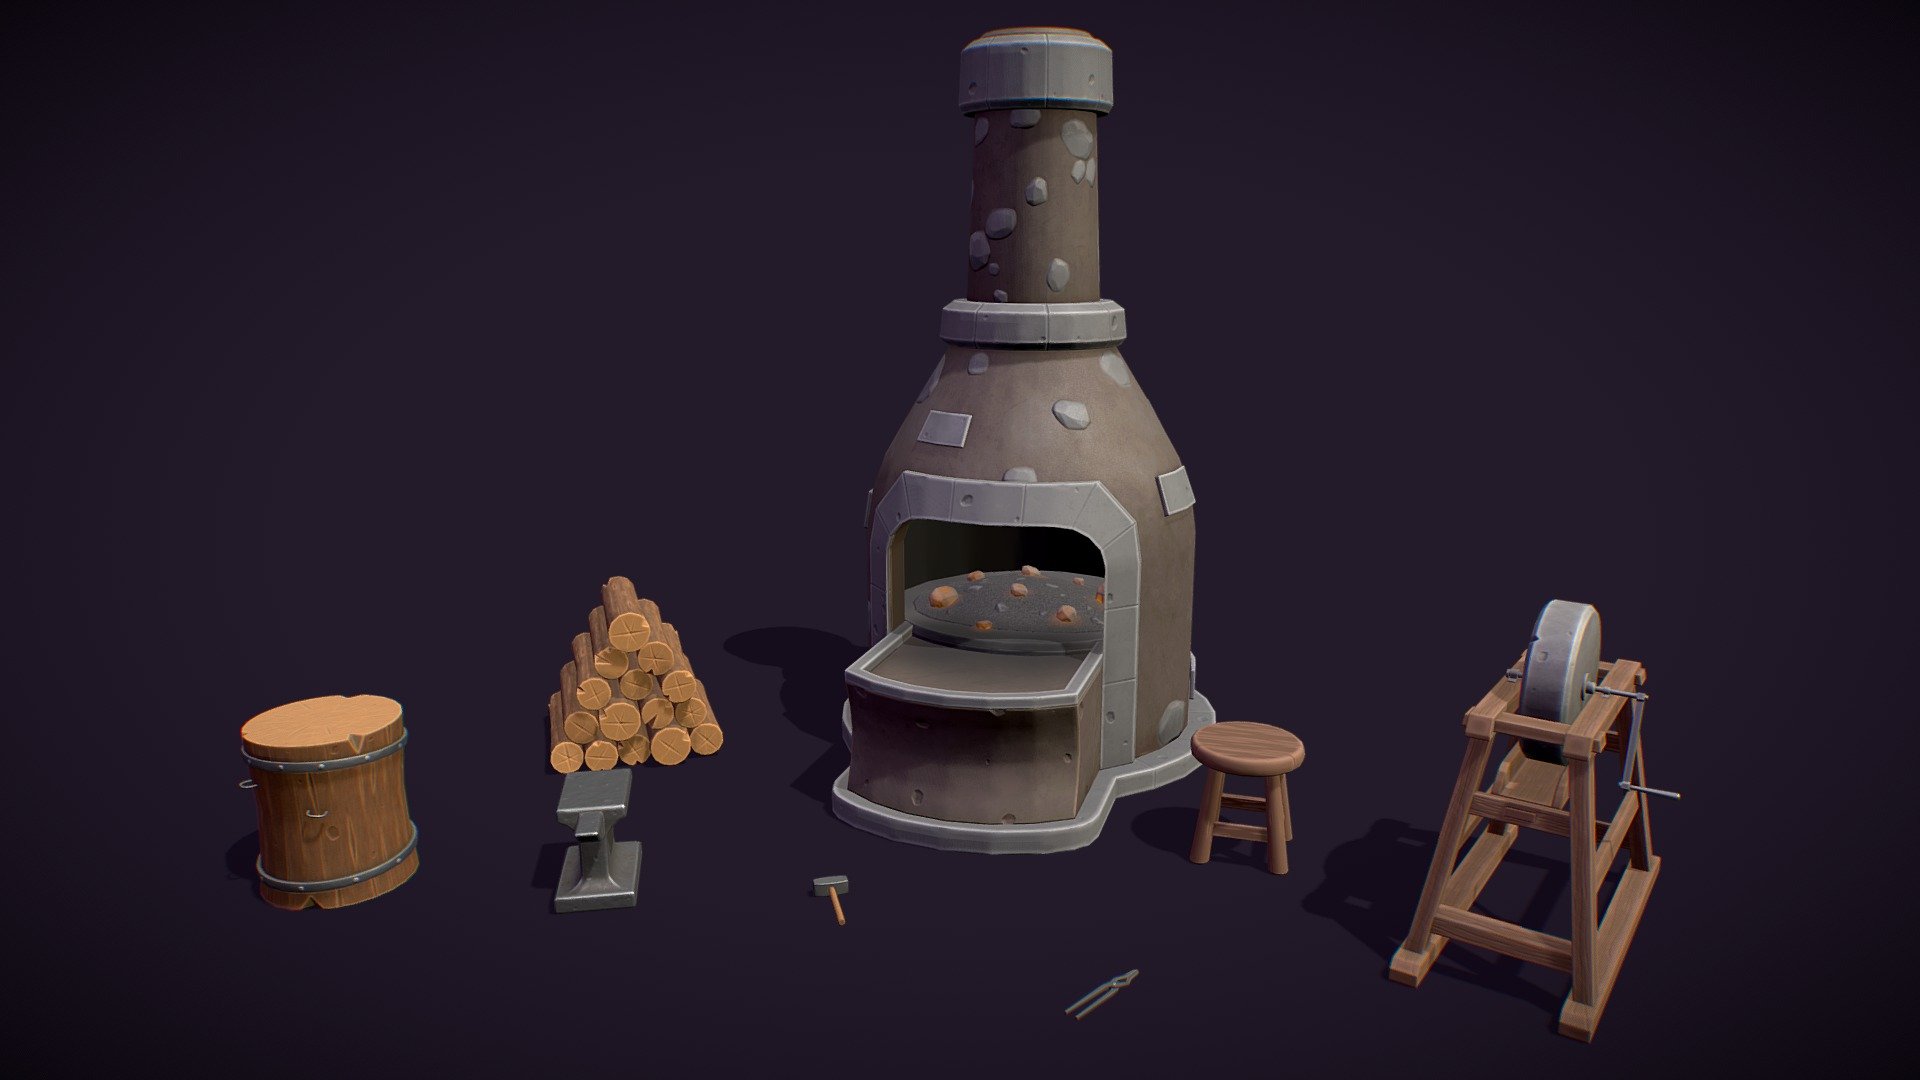 A Package of Stylized 8 Blacksmith Tools including Furnace, Tree Stump, Anvil and more.

Are you liked this Package? Feel free to take a look on my another models! Here

Features:

.Fbx, .Obj, .Uasset and .Blend files.

Low Poly Mesh game-ready.

Real-World Scale (centimeters).

Unreal Project 4.20+

Custom Collision for Unreal Engine 4 (Handmade).

Tris Count: 336 to 2,364.

Number of Textures (PNG): 41

Number of Textures (UE4): 25

Number of Materials (UE4): 3 Materials and 8 Material Instances

PBR Textures (1024x1024) and (2048x2048) (PNG).

Type of Textures: Base Color, Roughness, Metallic, Normal Map and Ambient Occlusion (PNG).

Combined RMA texture (Roughness, Metallic and Ambient Occlusion) for Unreal Engine 4 (PNG) 3d model